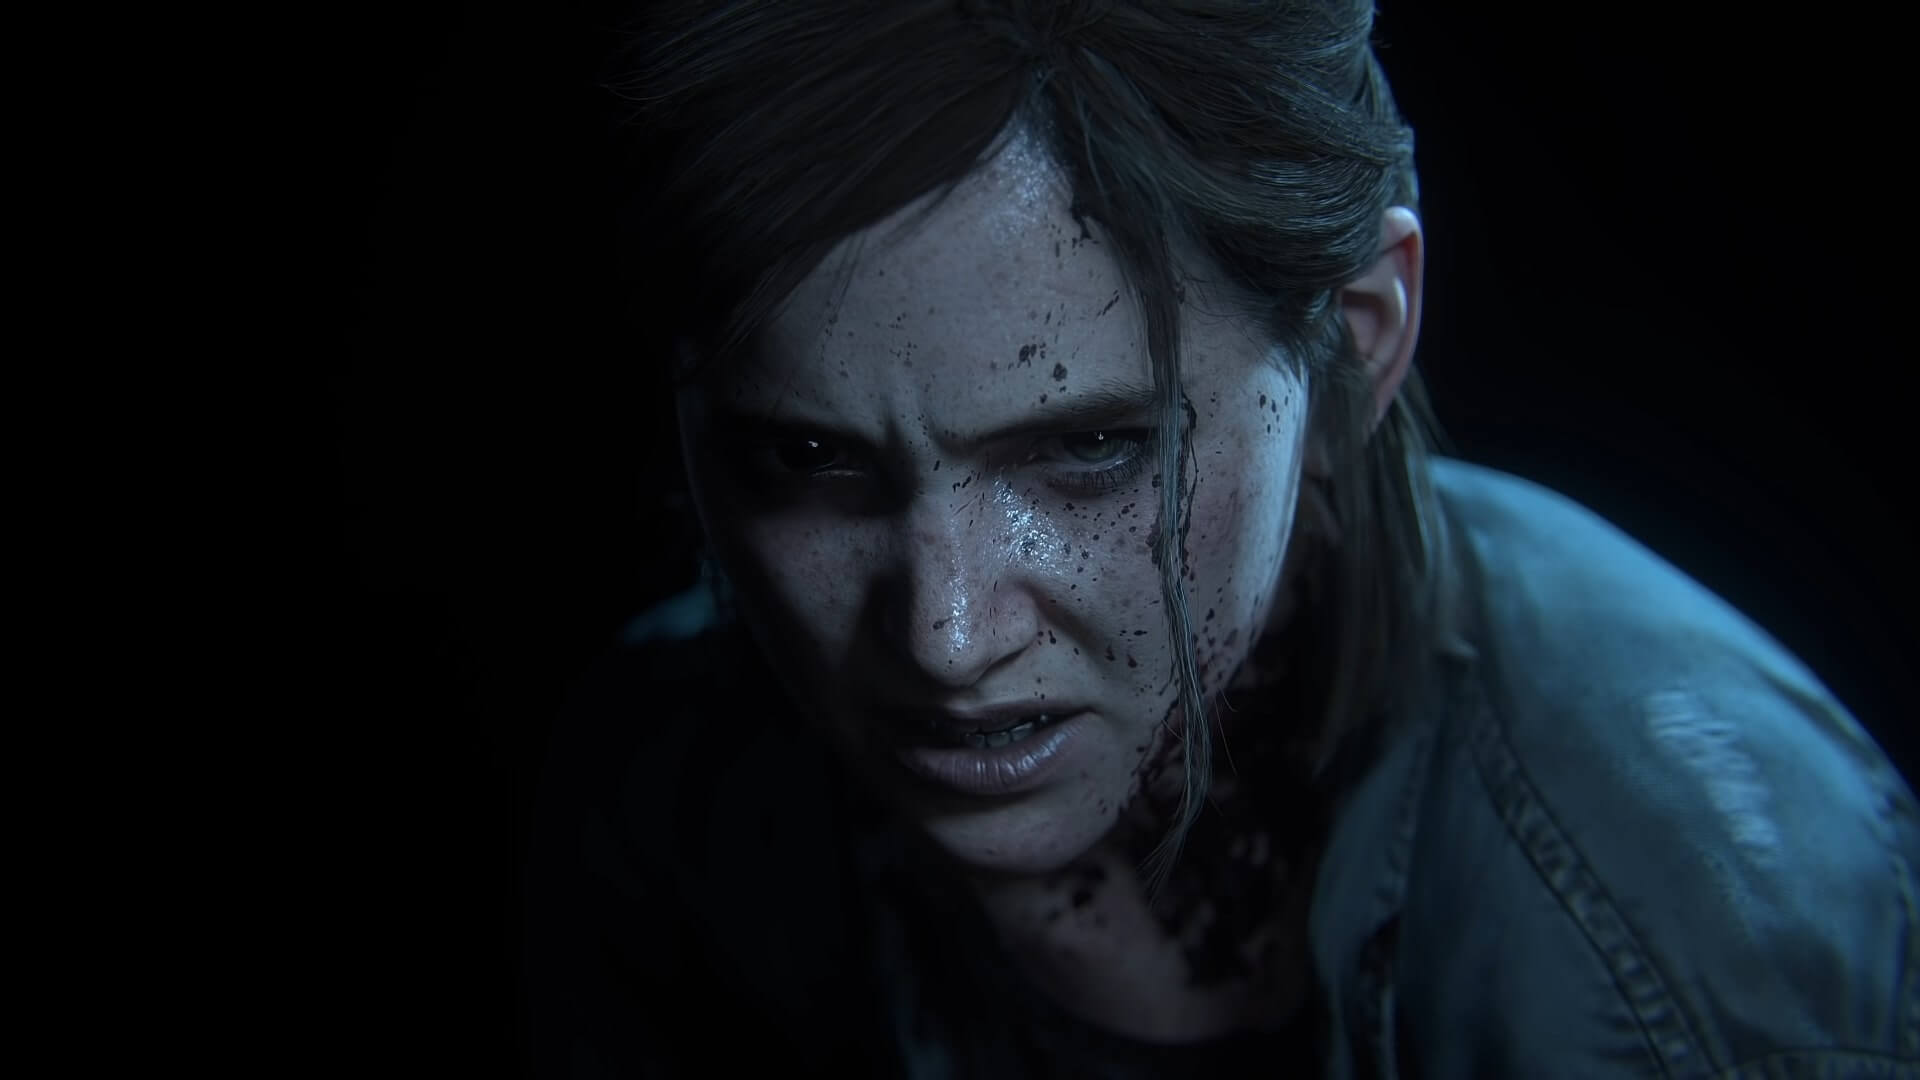 Metacritic - The Last of Us Part I reviews are coming in